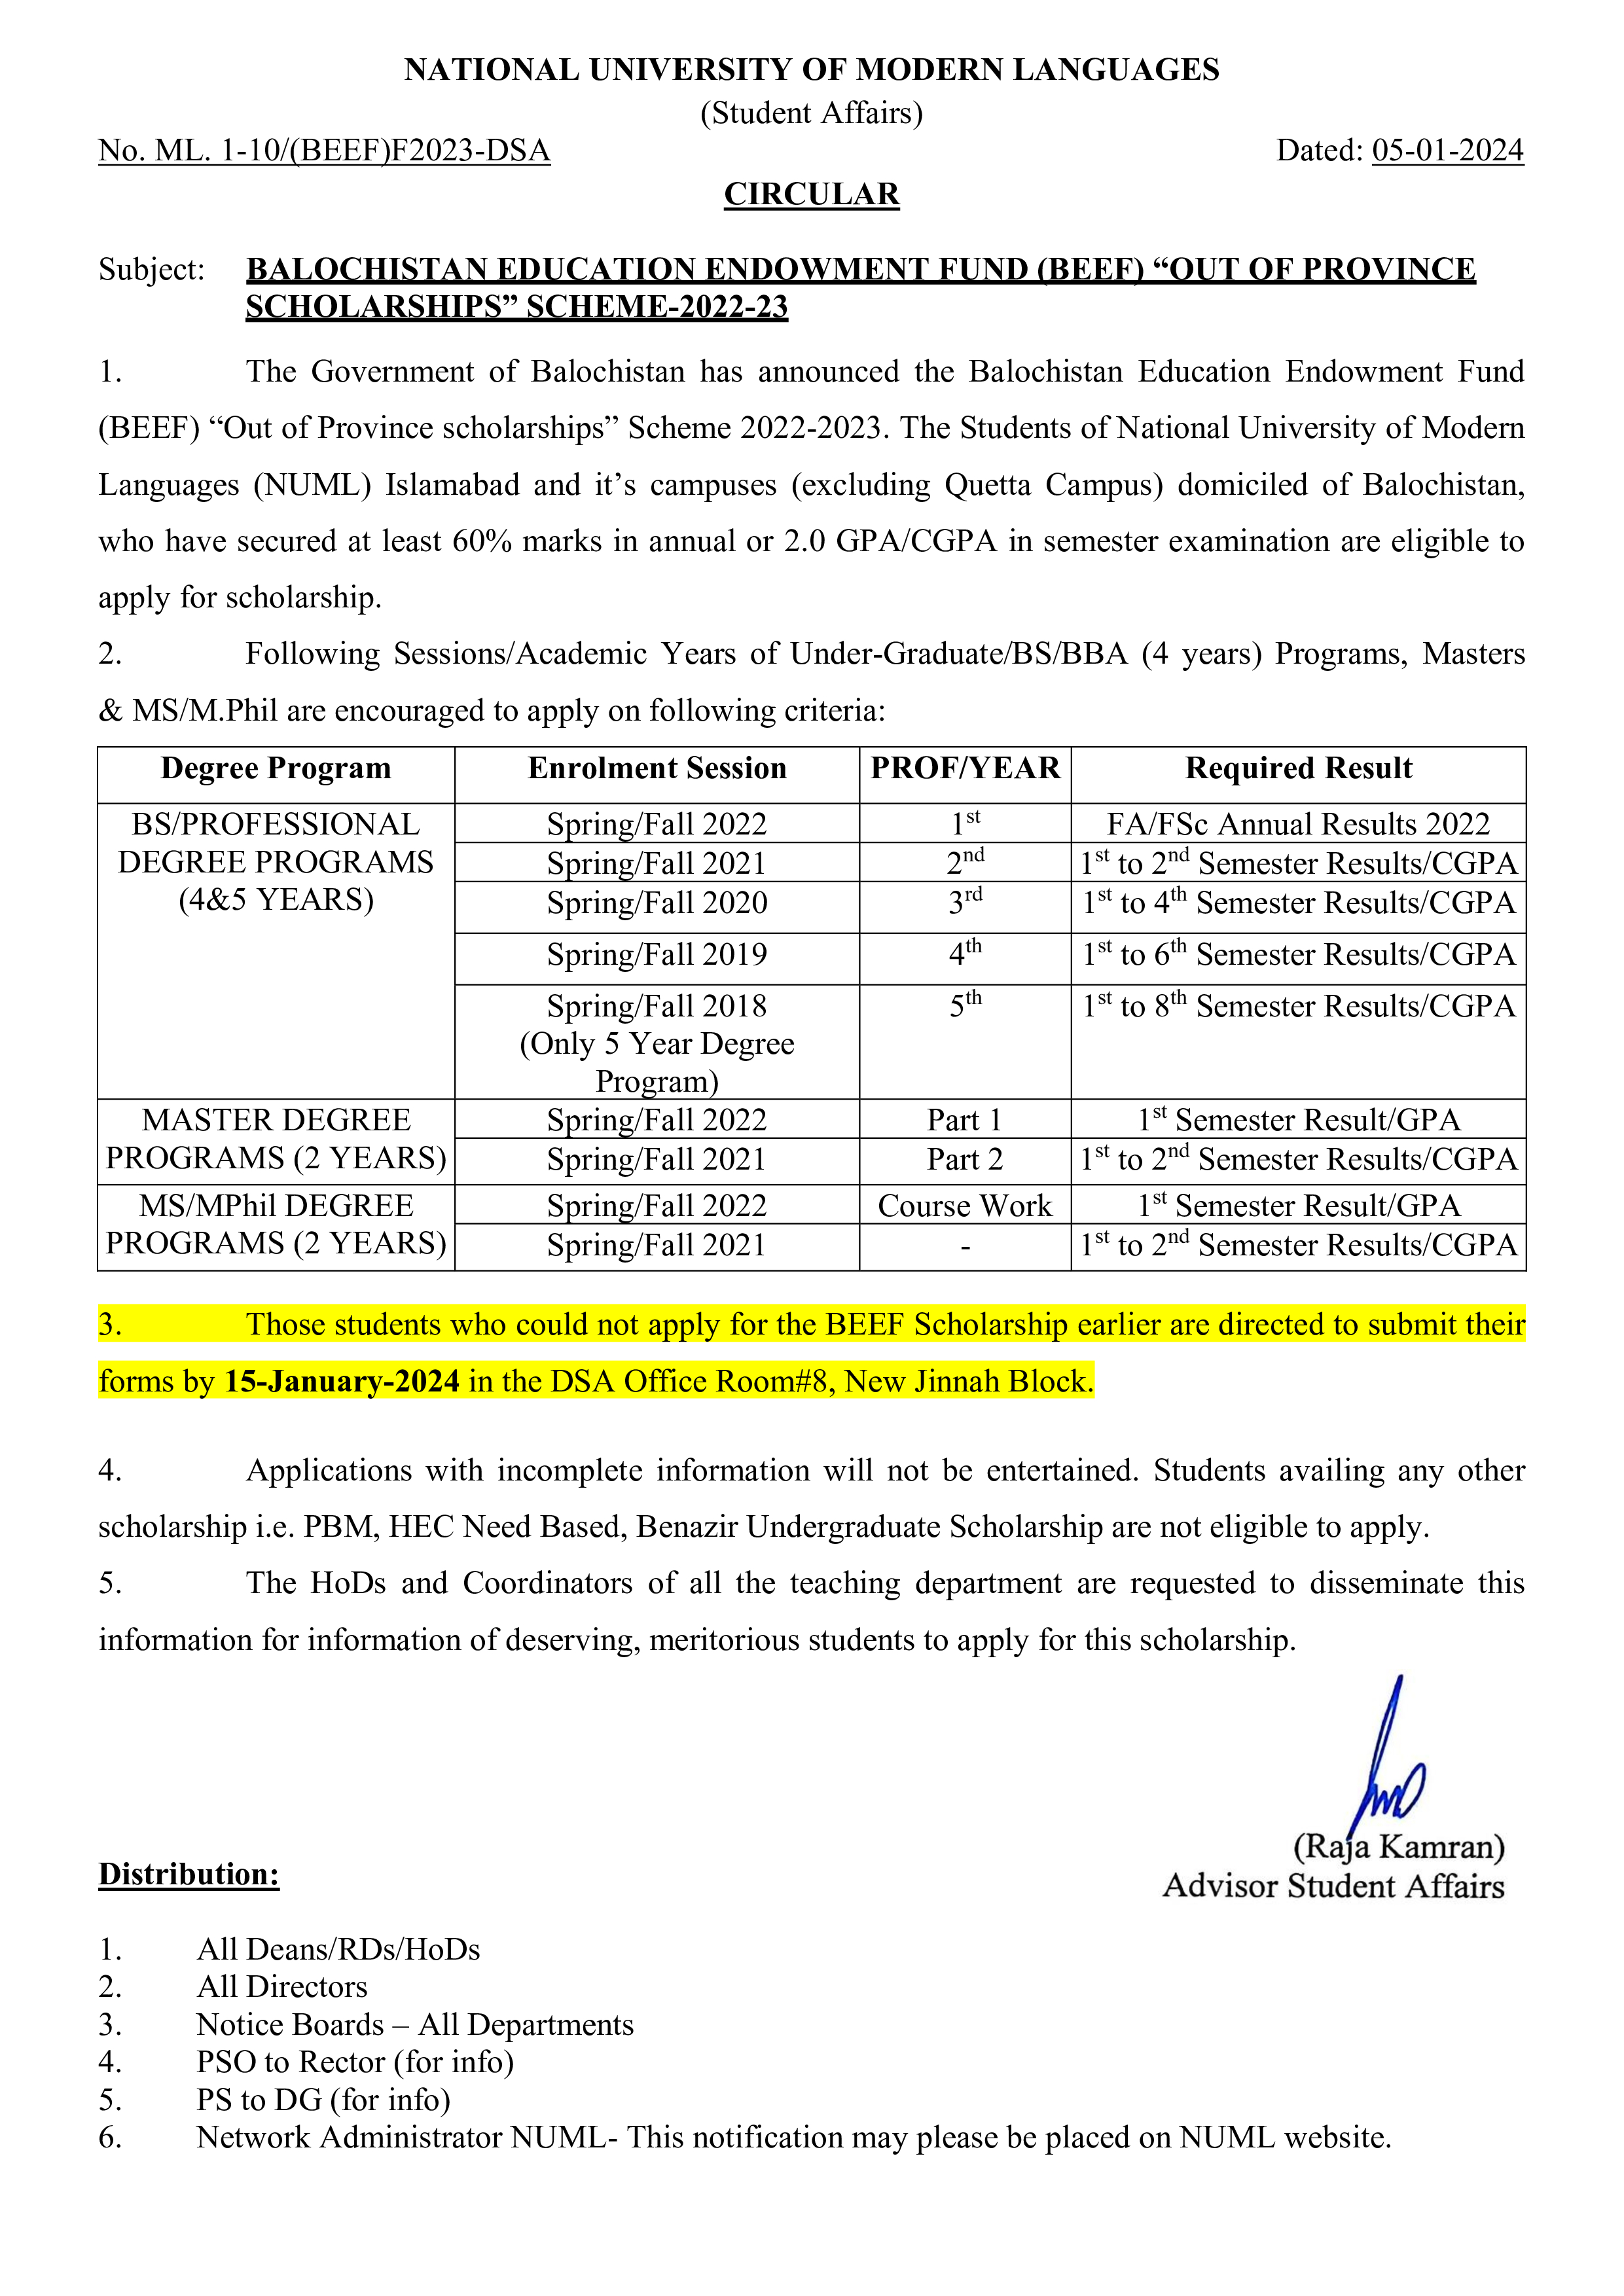 BALOCHISTAN EDUCATION ENDOWMENT FUND (BEEF) “OUT OF PROVINCE SCHOLARSHIPS” SCHEME-2022-23